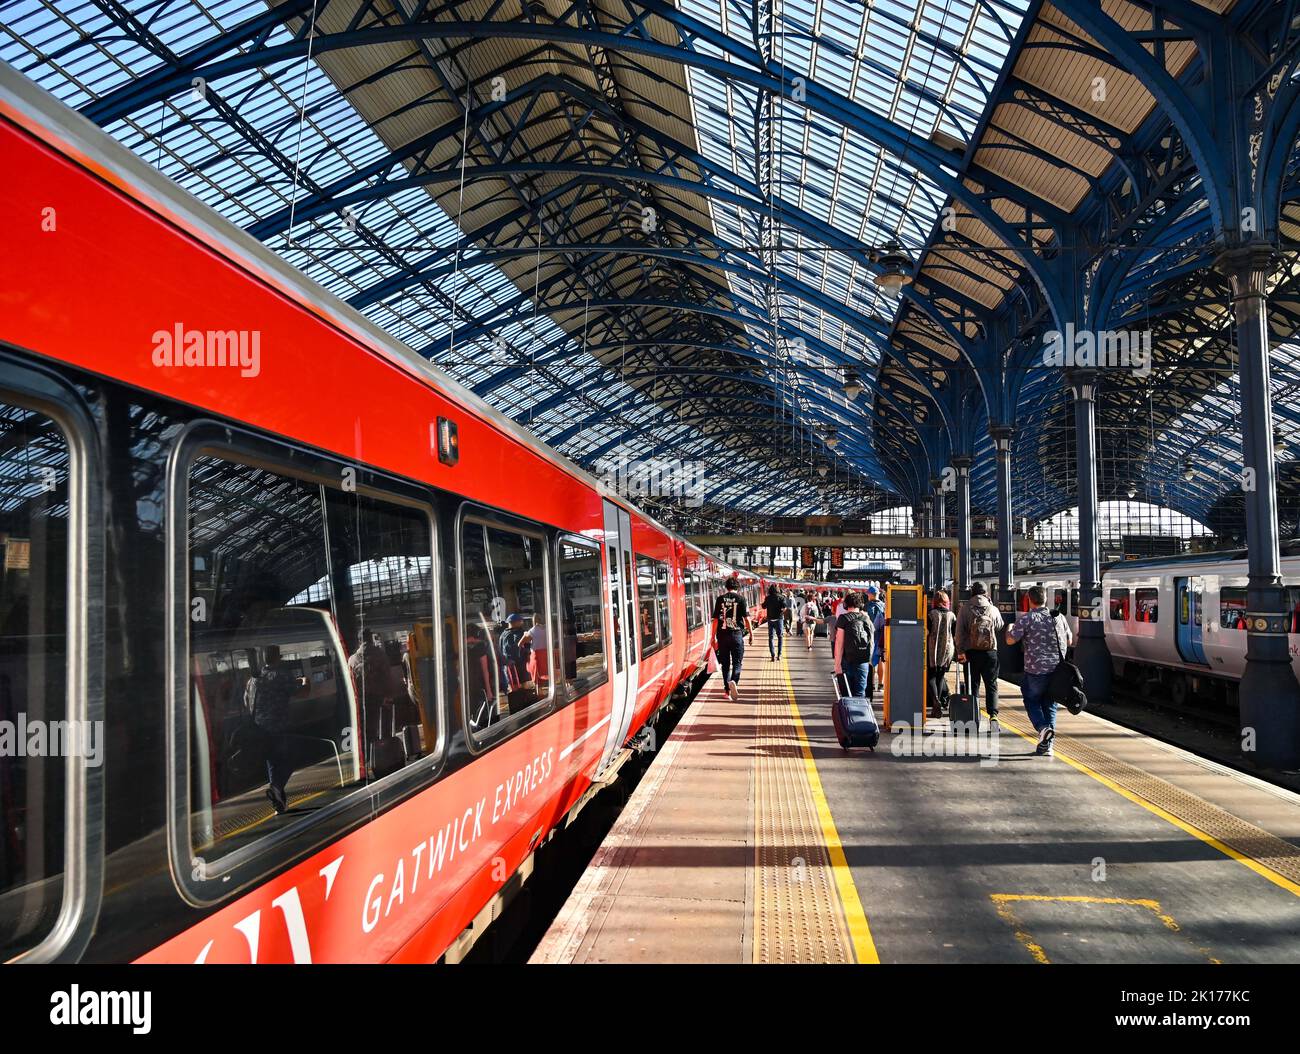 Gatwick Express train on the platform at Brighton Railway Station in Sussex UK  Photograph taken by Simon Dack Stock Photo